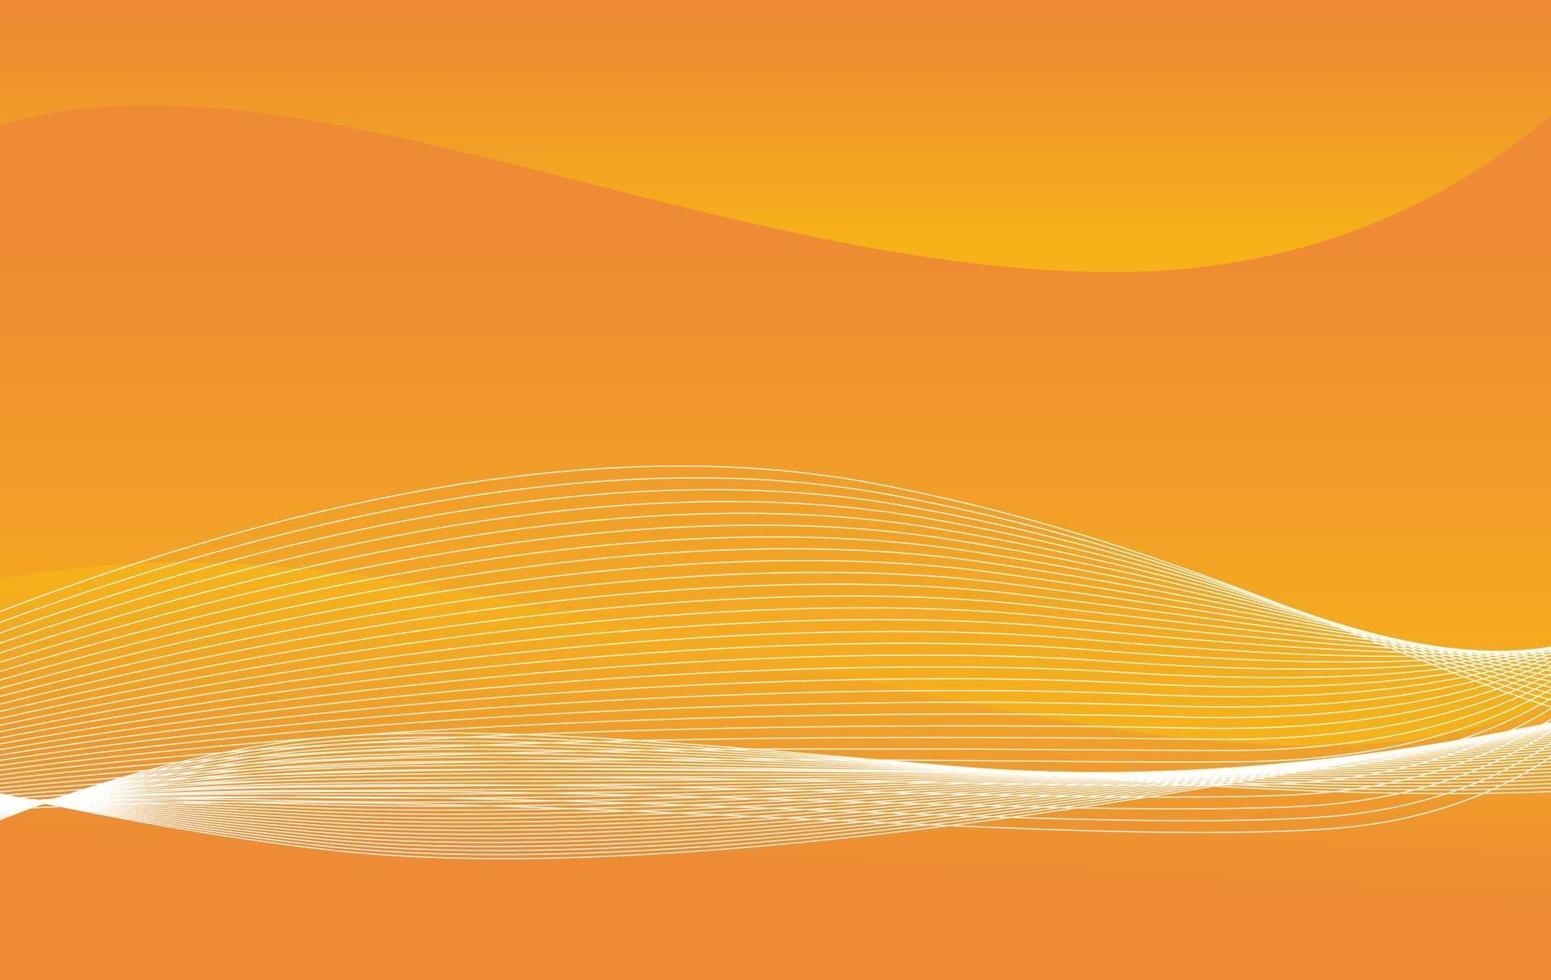 Orange background with abstract shapes, vector design.